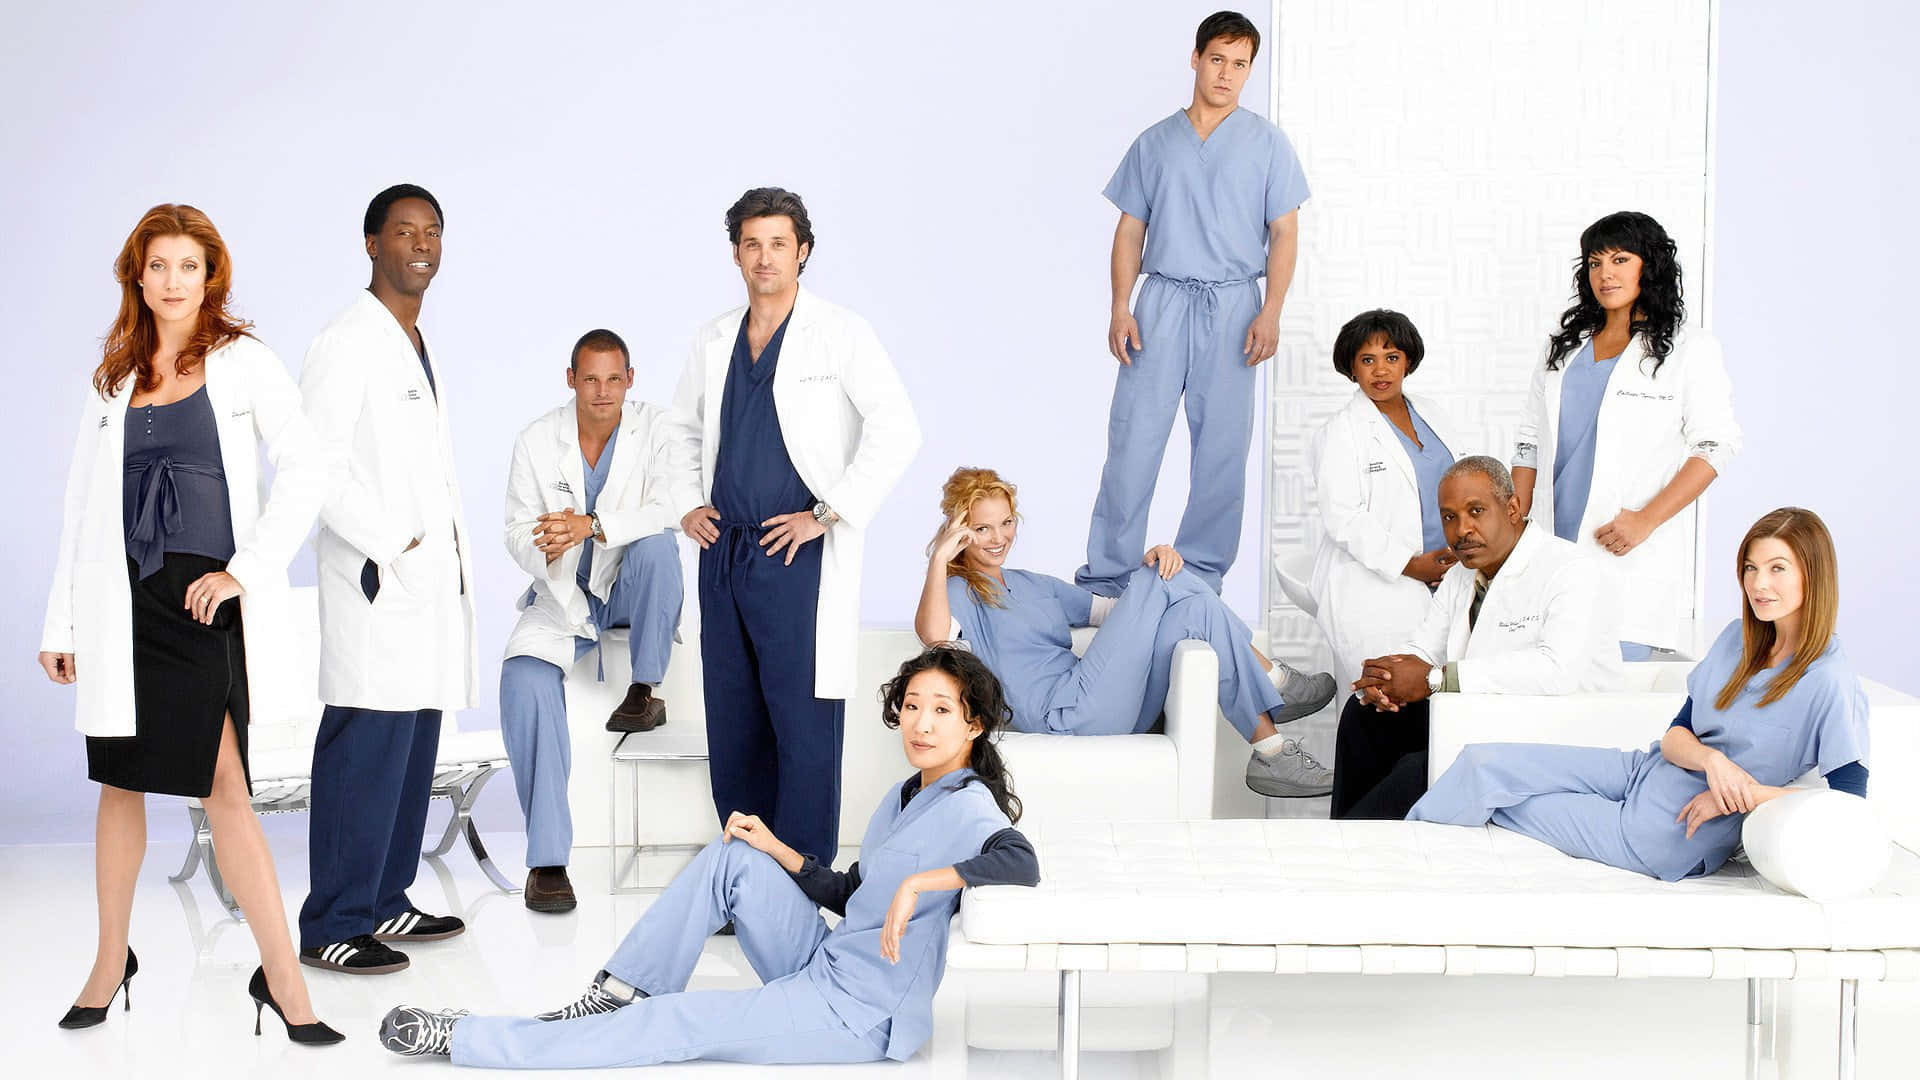 Relive the drama and suspense of Grey's Anatomy